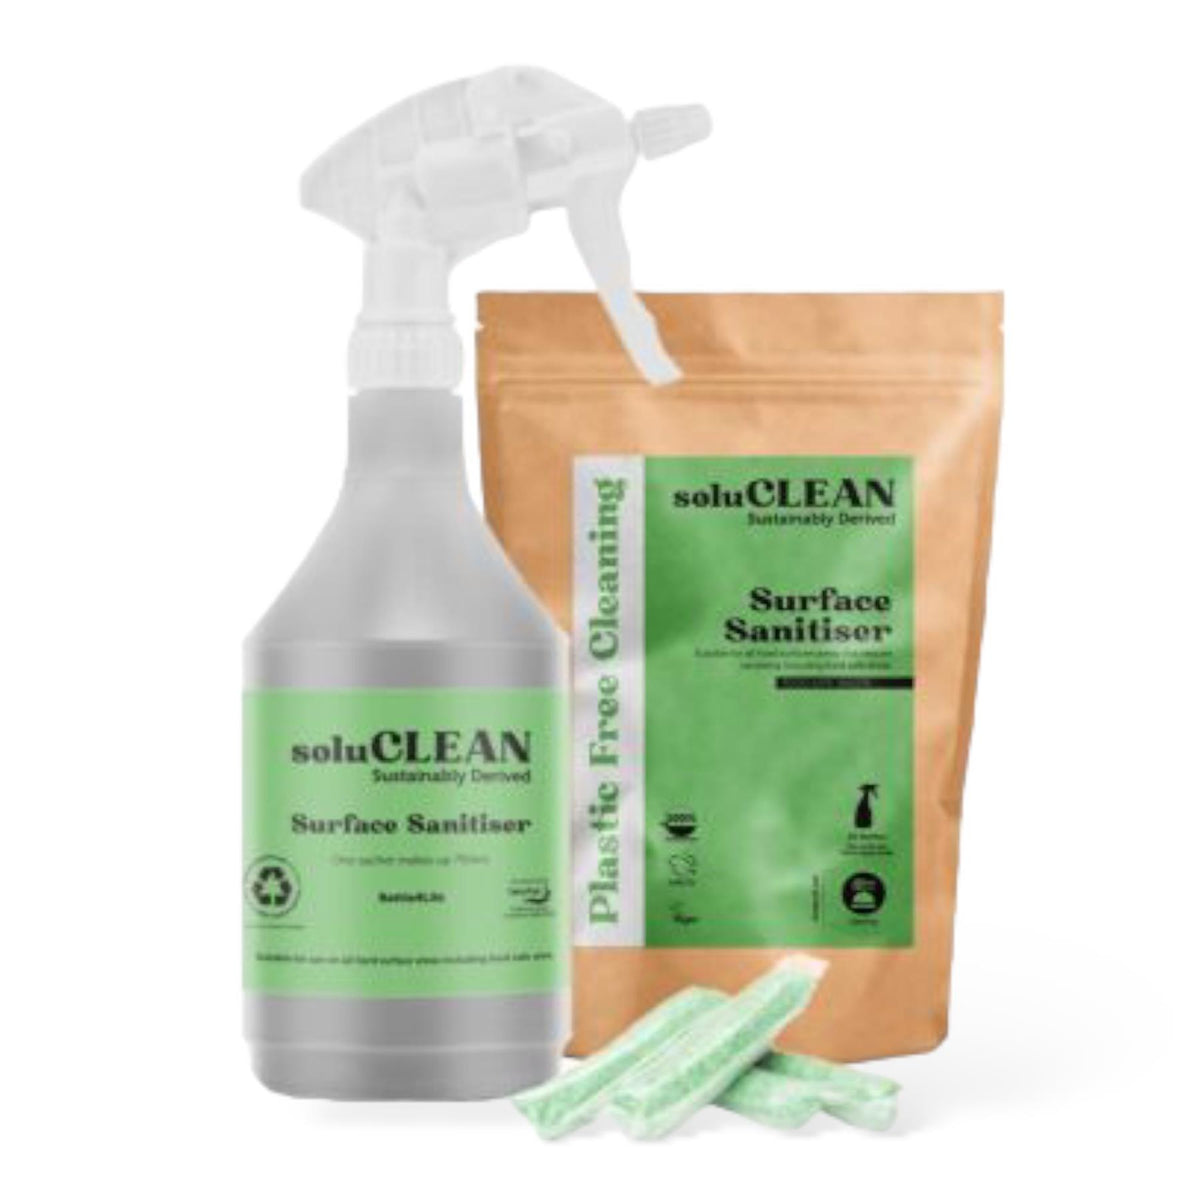 Soluclean, Starter Kit, Surface Sanitiser, 750ml Reuable Trigger Spray Bottle and One Packet of 10 Sachets, Plastic Free Cleaning